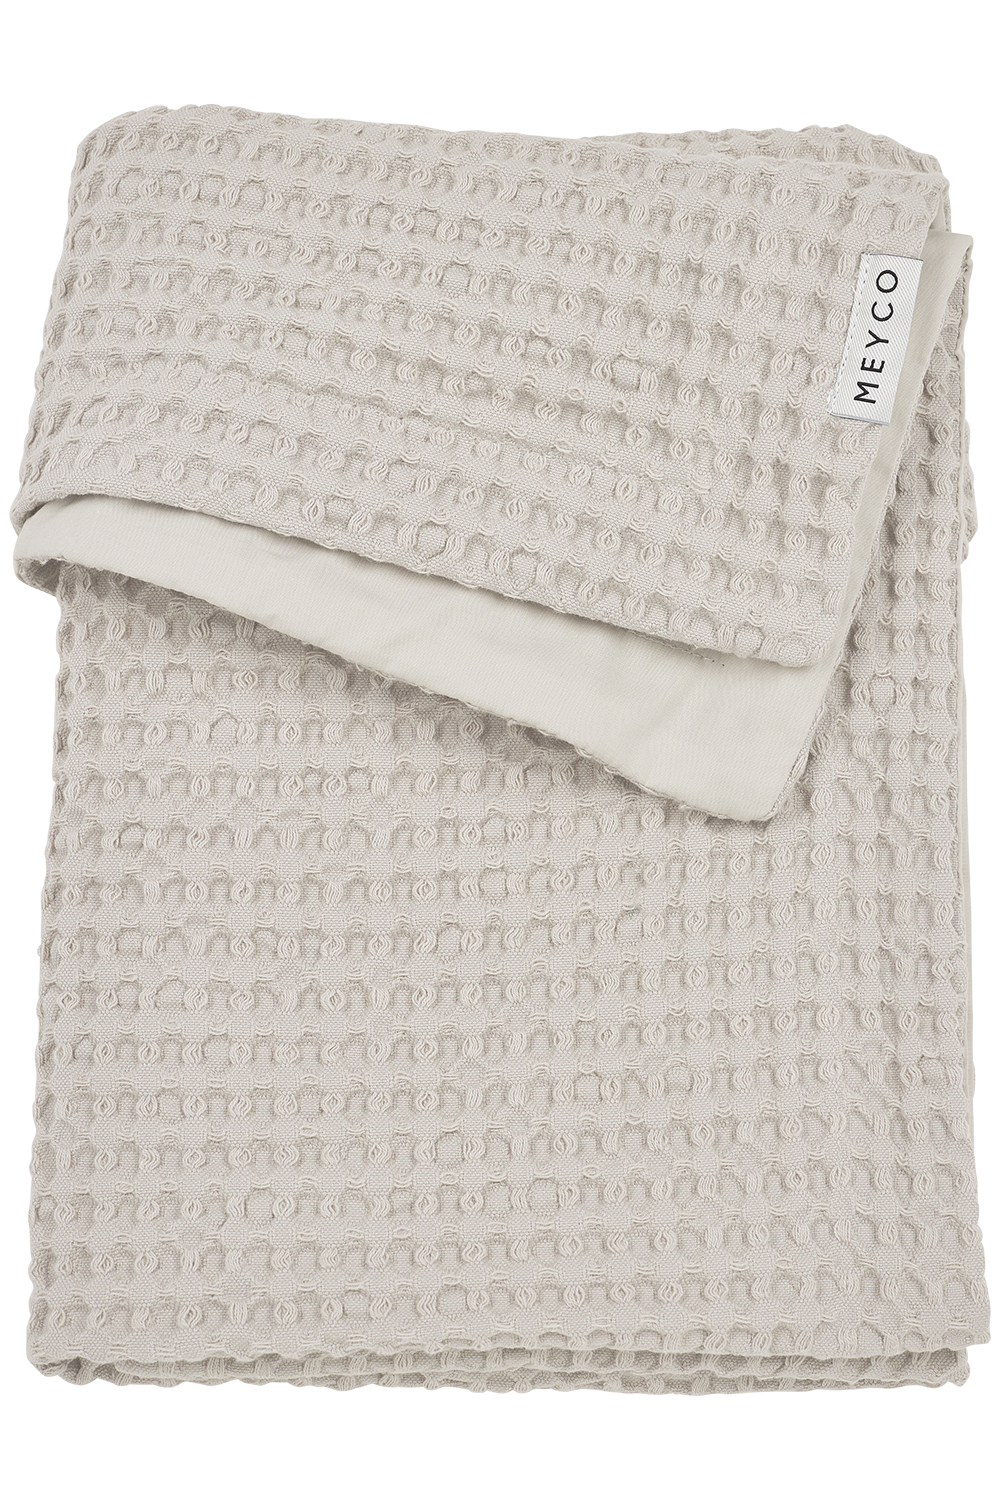 Cot bed blanket Waffle Cotton - greige - 100x150cm